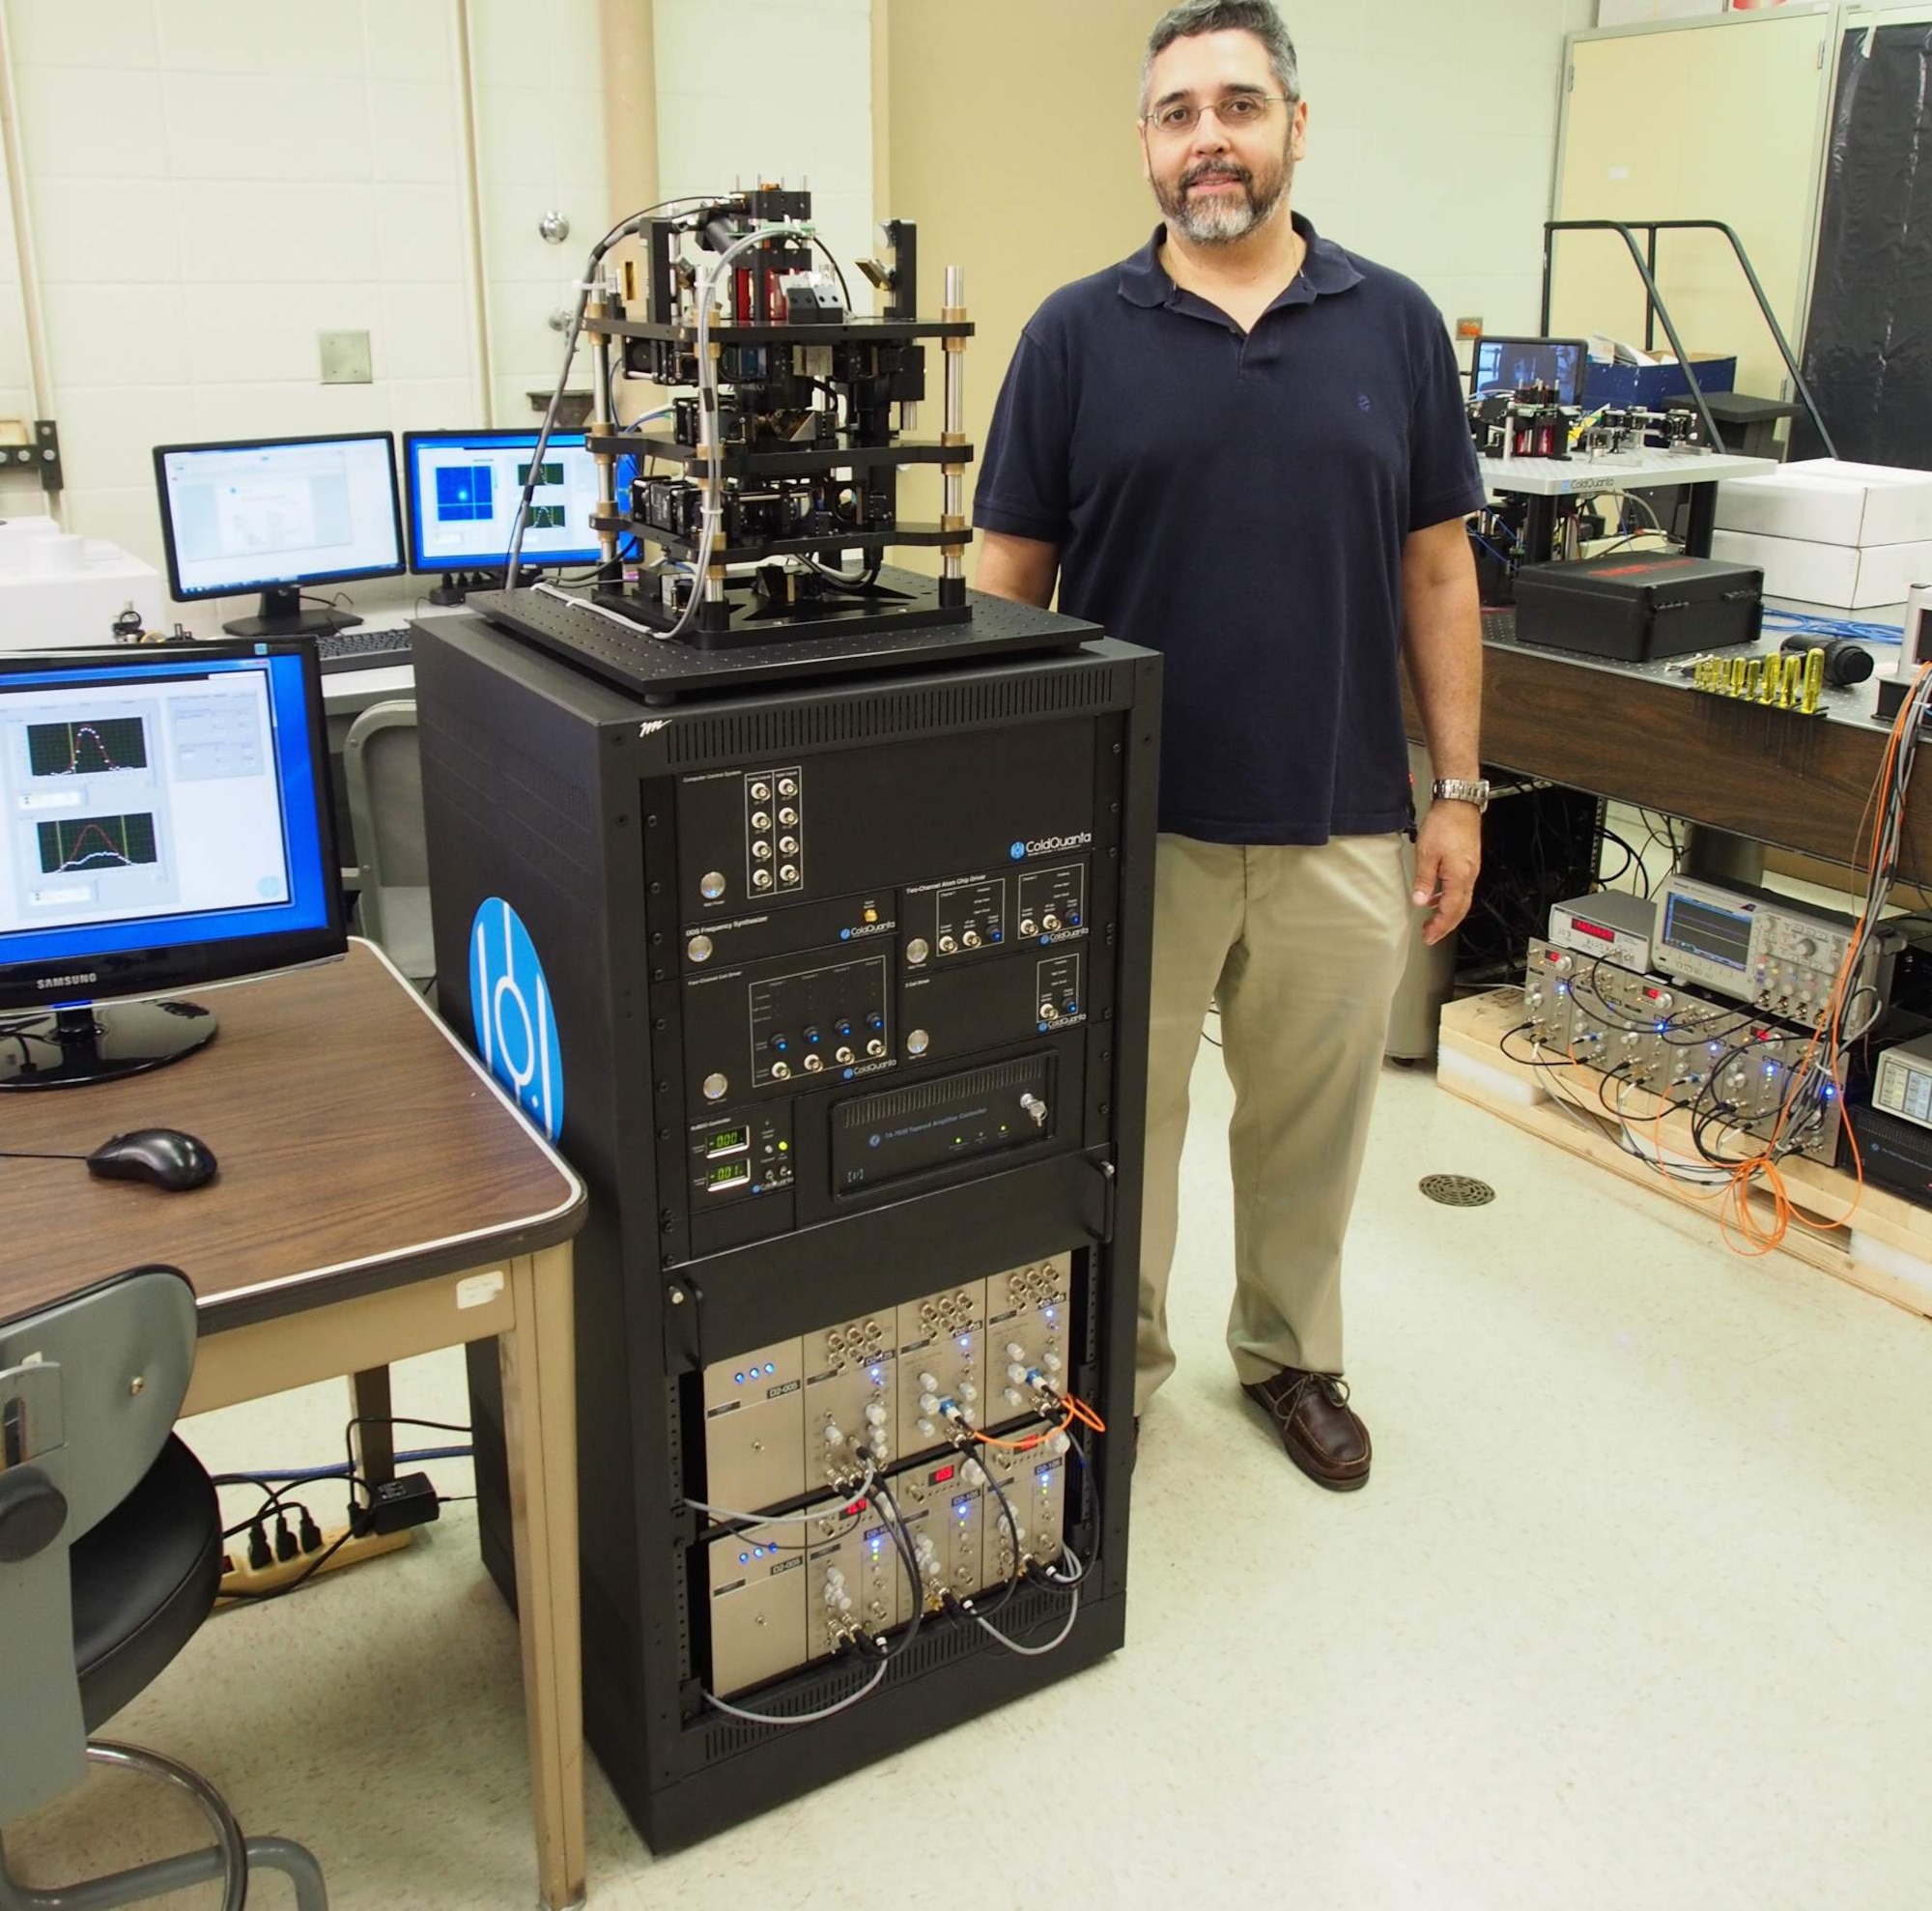 Dr. Jeffrey Yepez, researcher, Air Force Research Laboratory Directed Energy Directorate and leader of the joint AFRL and University of Hawaii Manoa quantum computing group received two new table-top quantum computing systems to trap and study the behavior of atoms in their condensed, pristine state.The new systems, delivered by cold-atom technology developer, ColdQuanta, provide researchers with a lower cost, in house opportunity to study the mysteries of quantum physics. (Air Force photo)